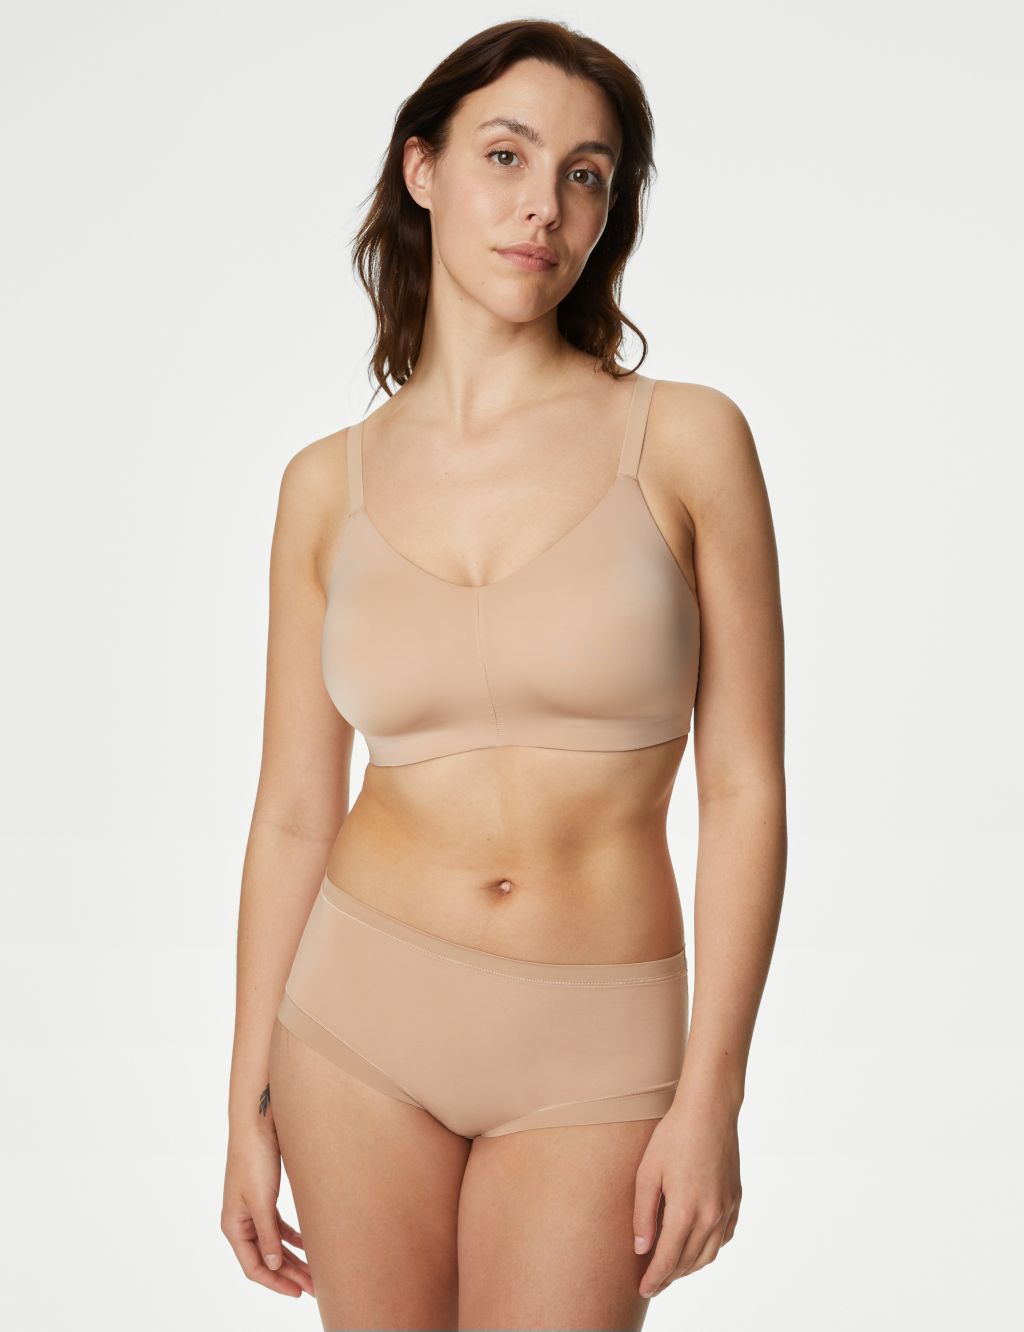 Flexifit™ Non-Wired Full Cup Bra F-H image 6